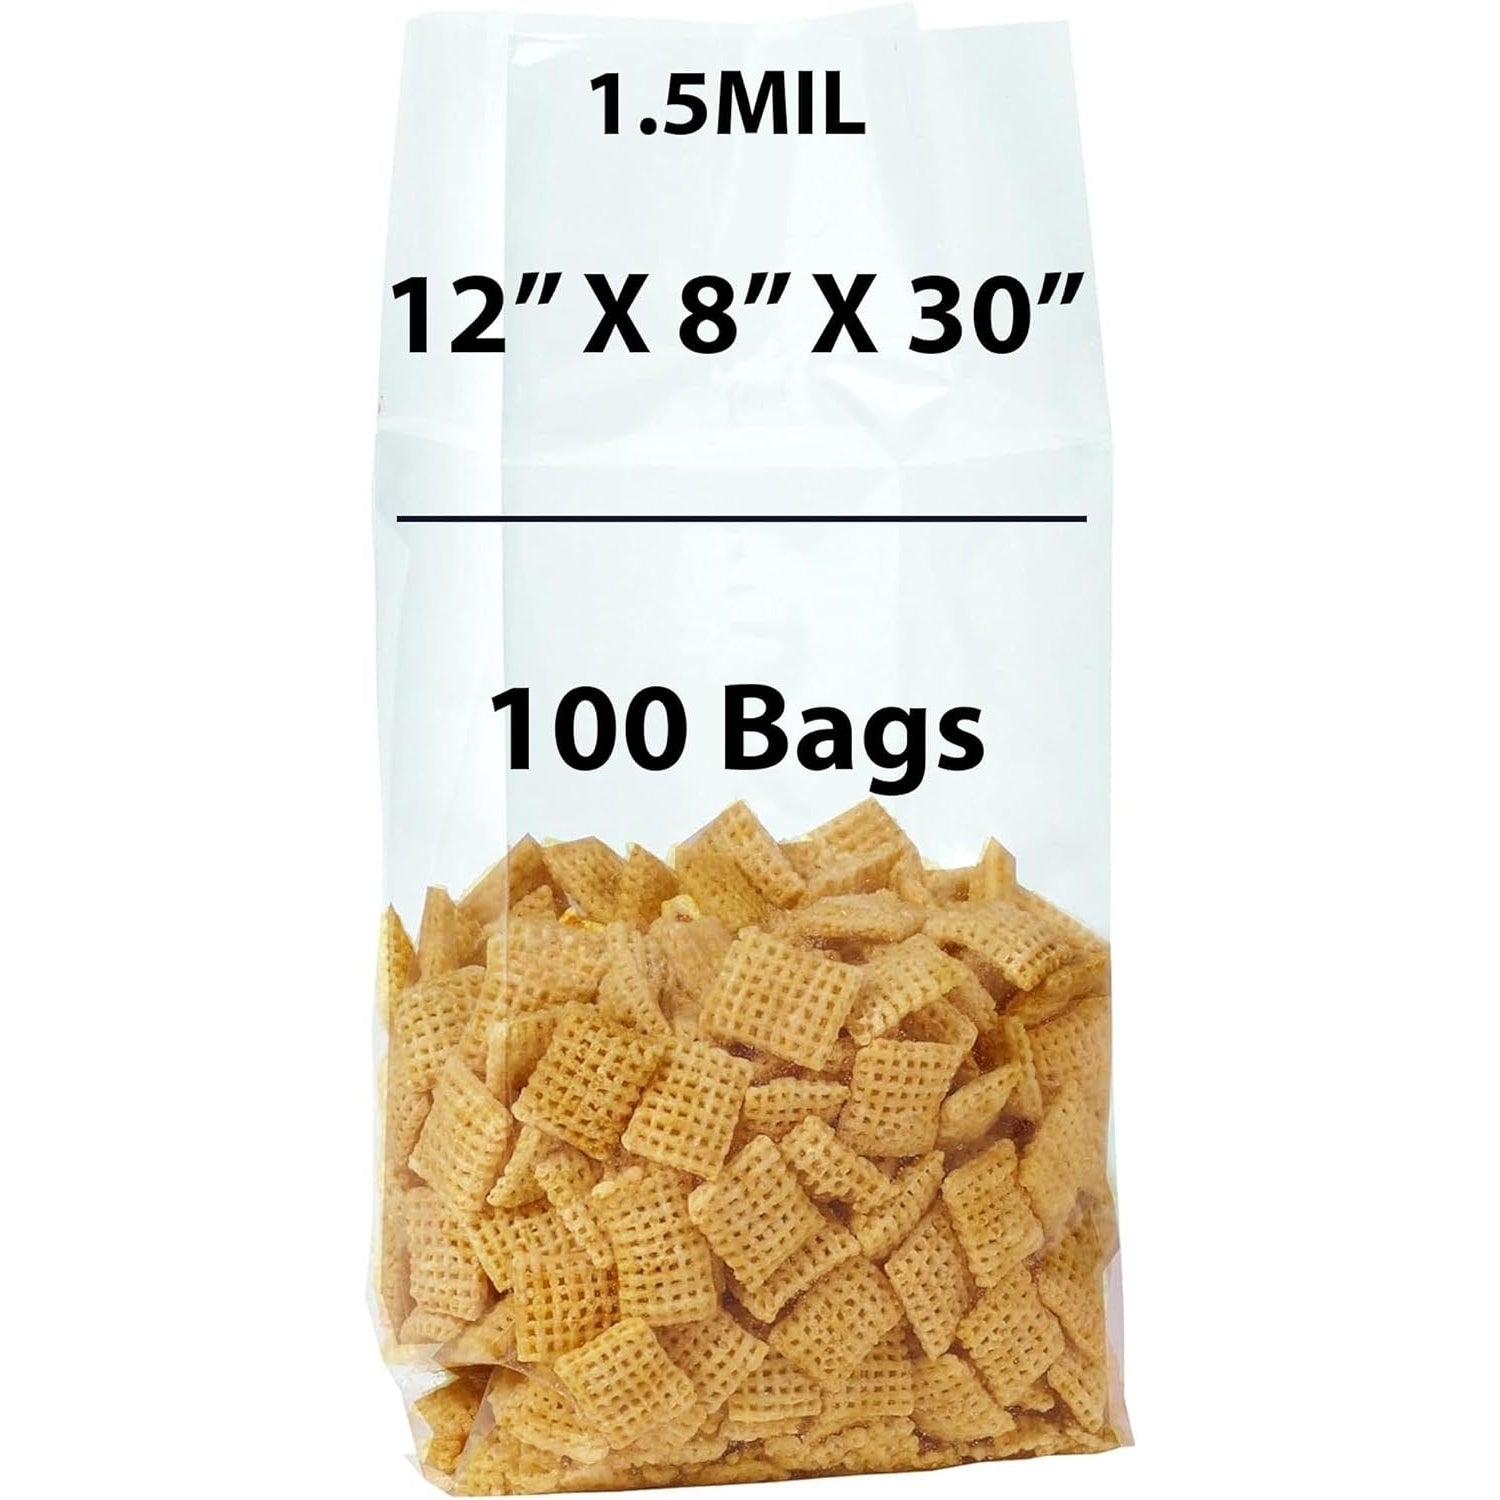 Gusseted Polypropylene Bags 1.5 Mil 12 inch X 8 inch X 30 inch Pack of 100 Bags